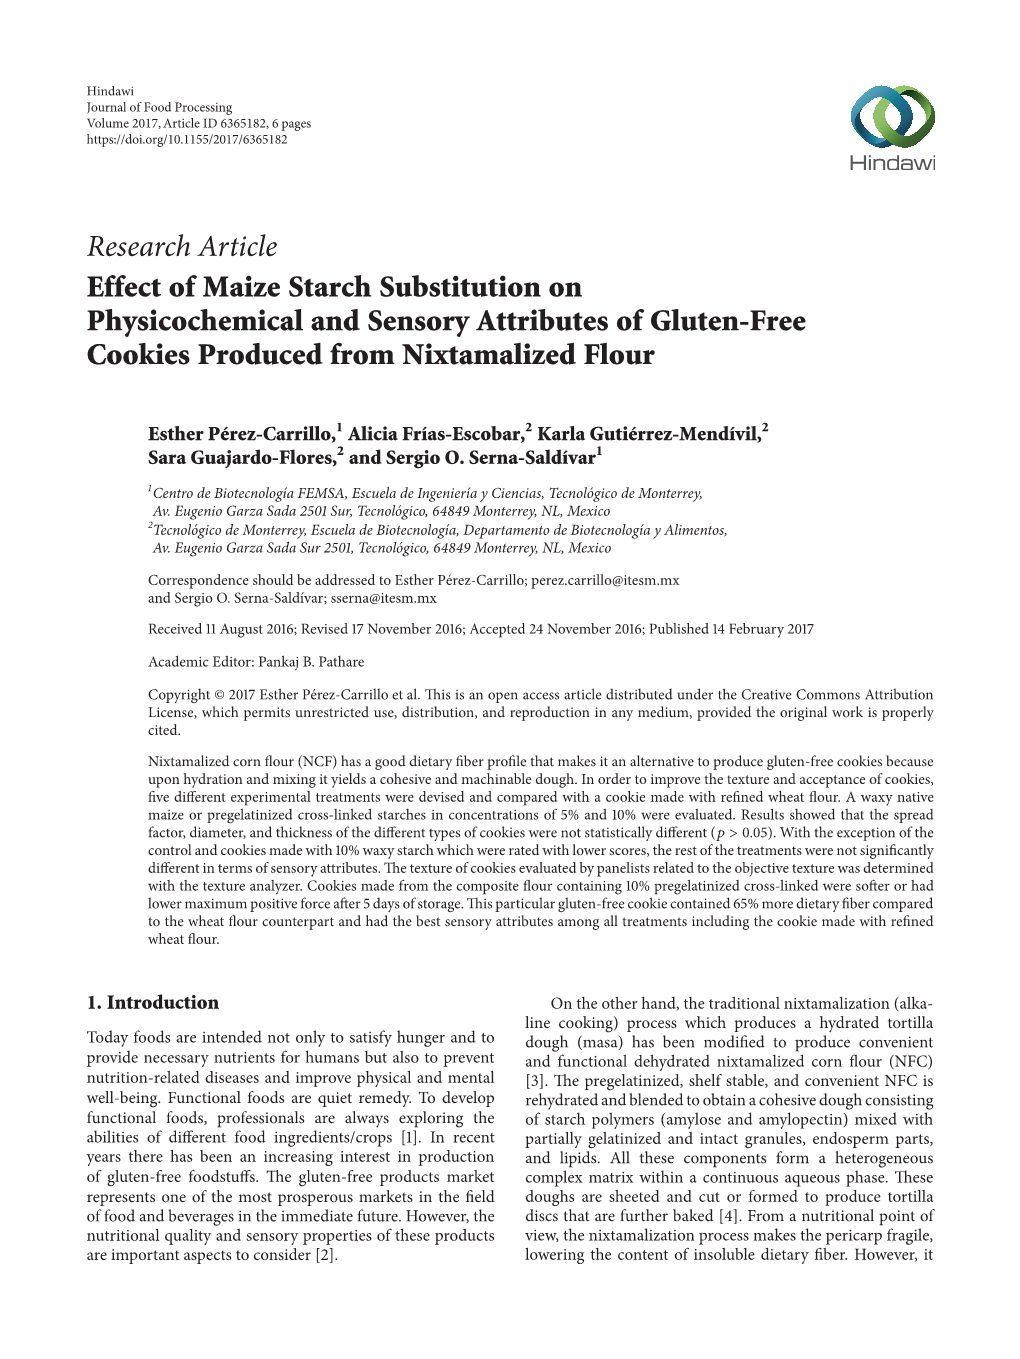 Effect of Maize Starch Substitution on Physicochemical and Sensory Attributes of Gluten-Free Cookies Produced from Nixtamalized Flour